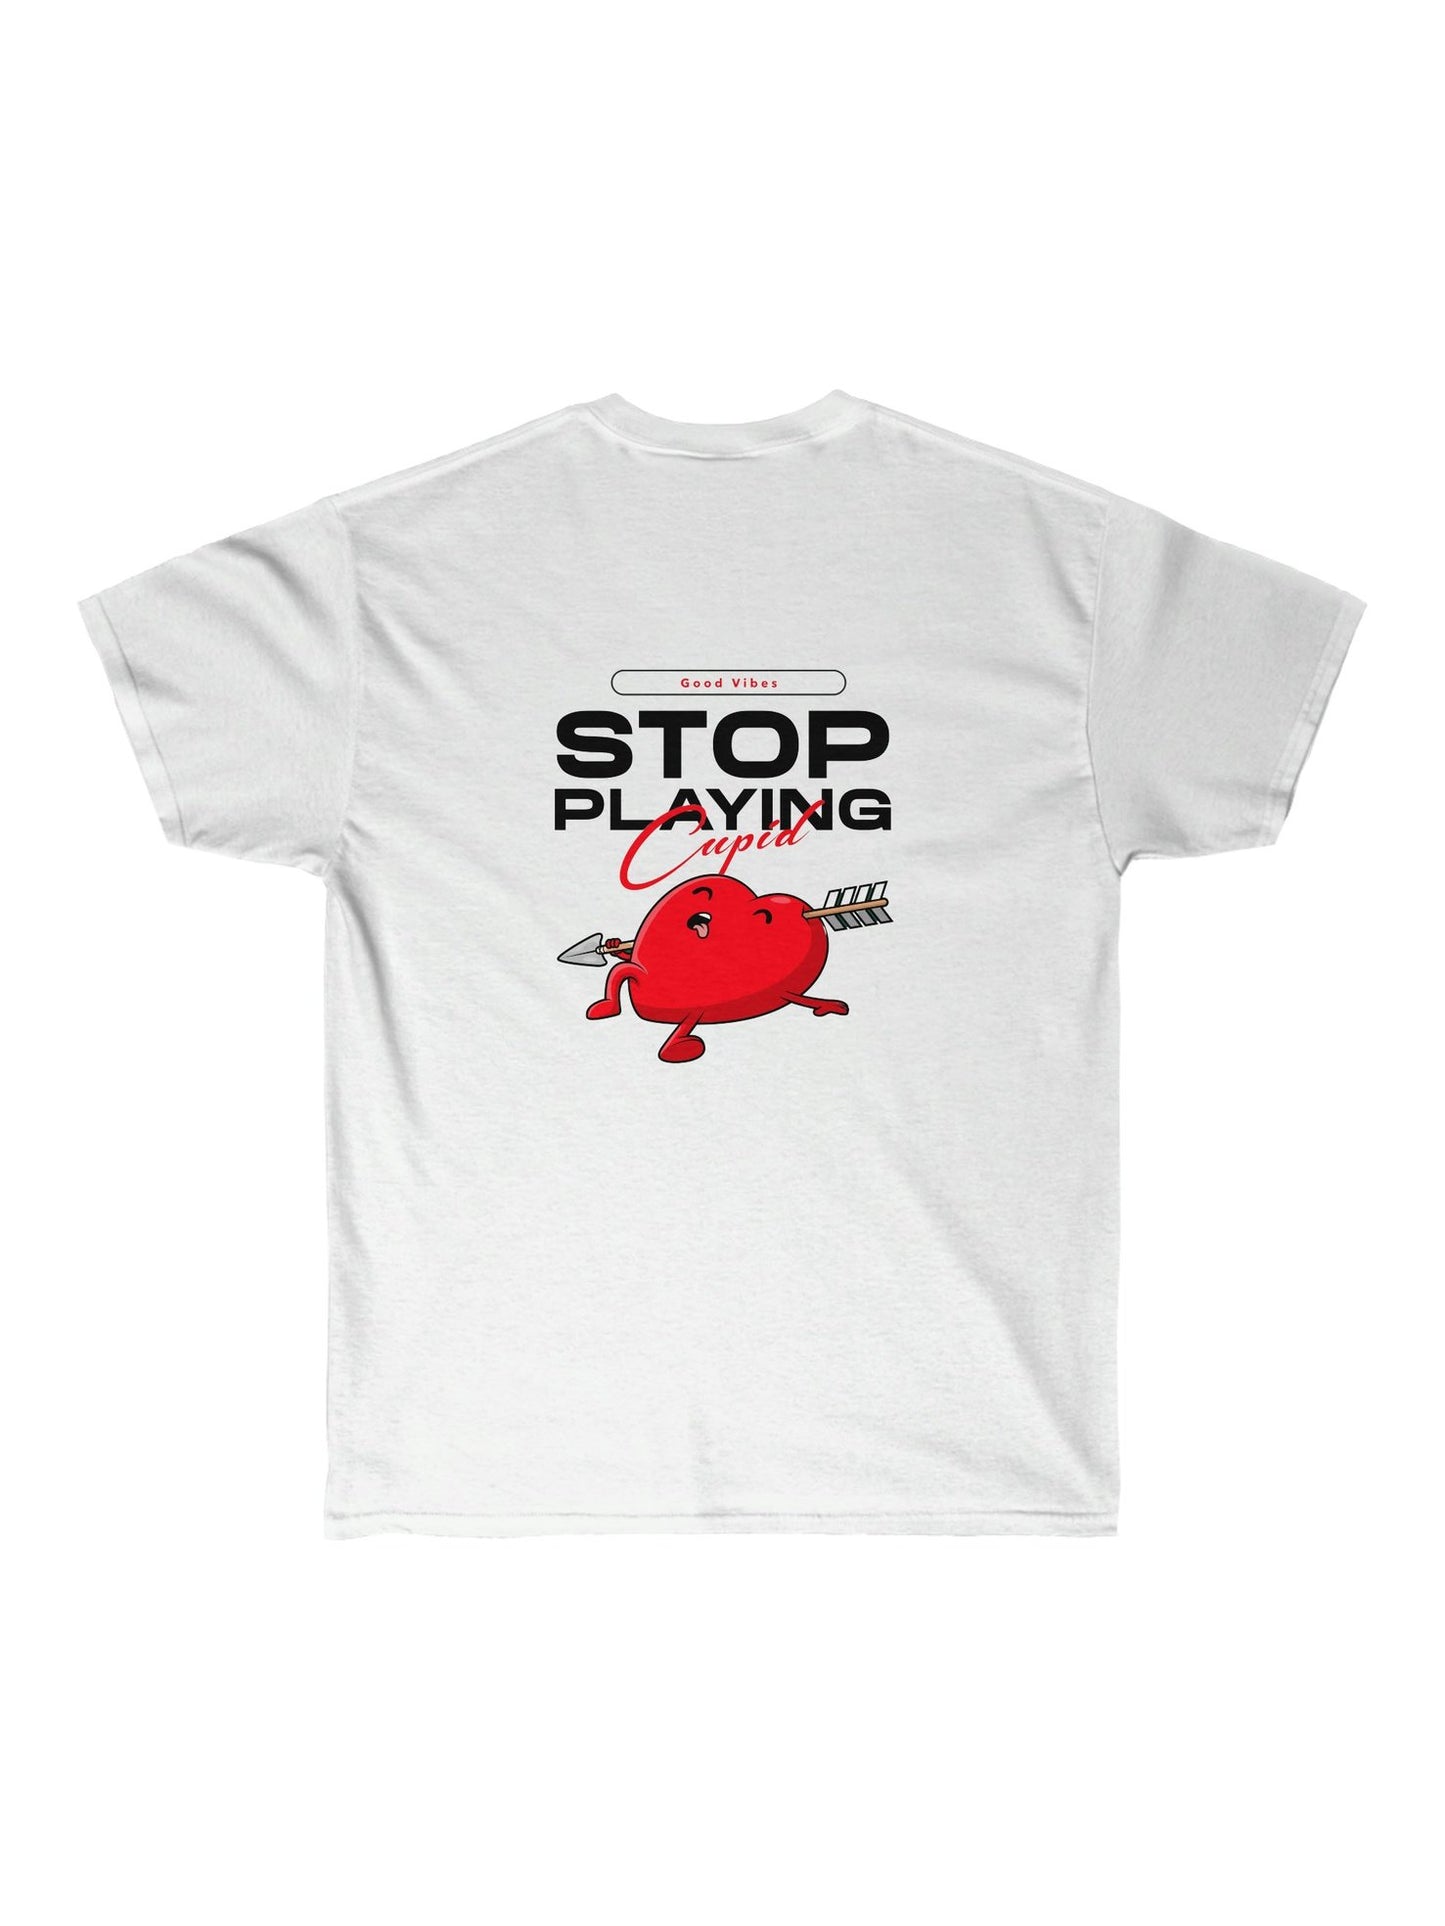 Stop Playing cupid Graphic tee